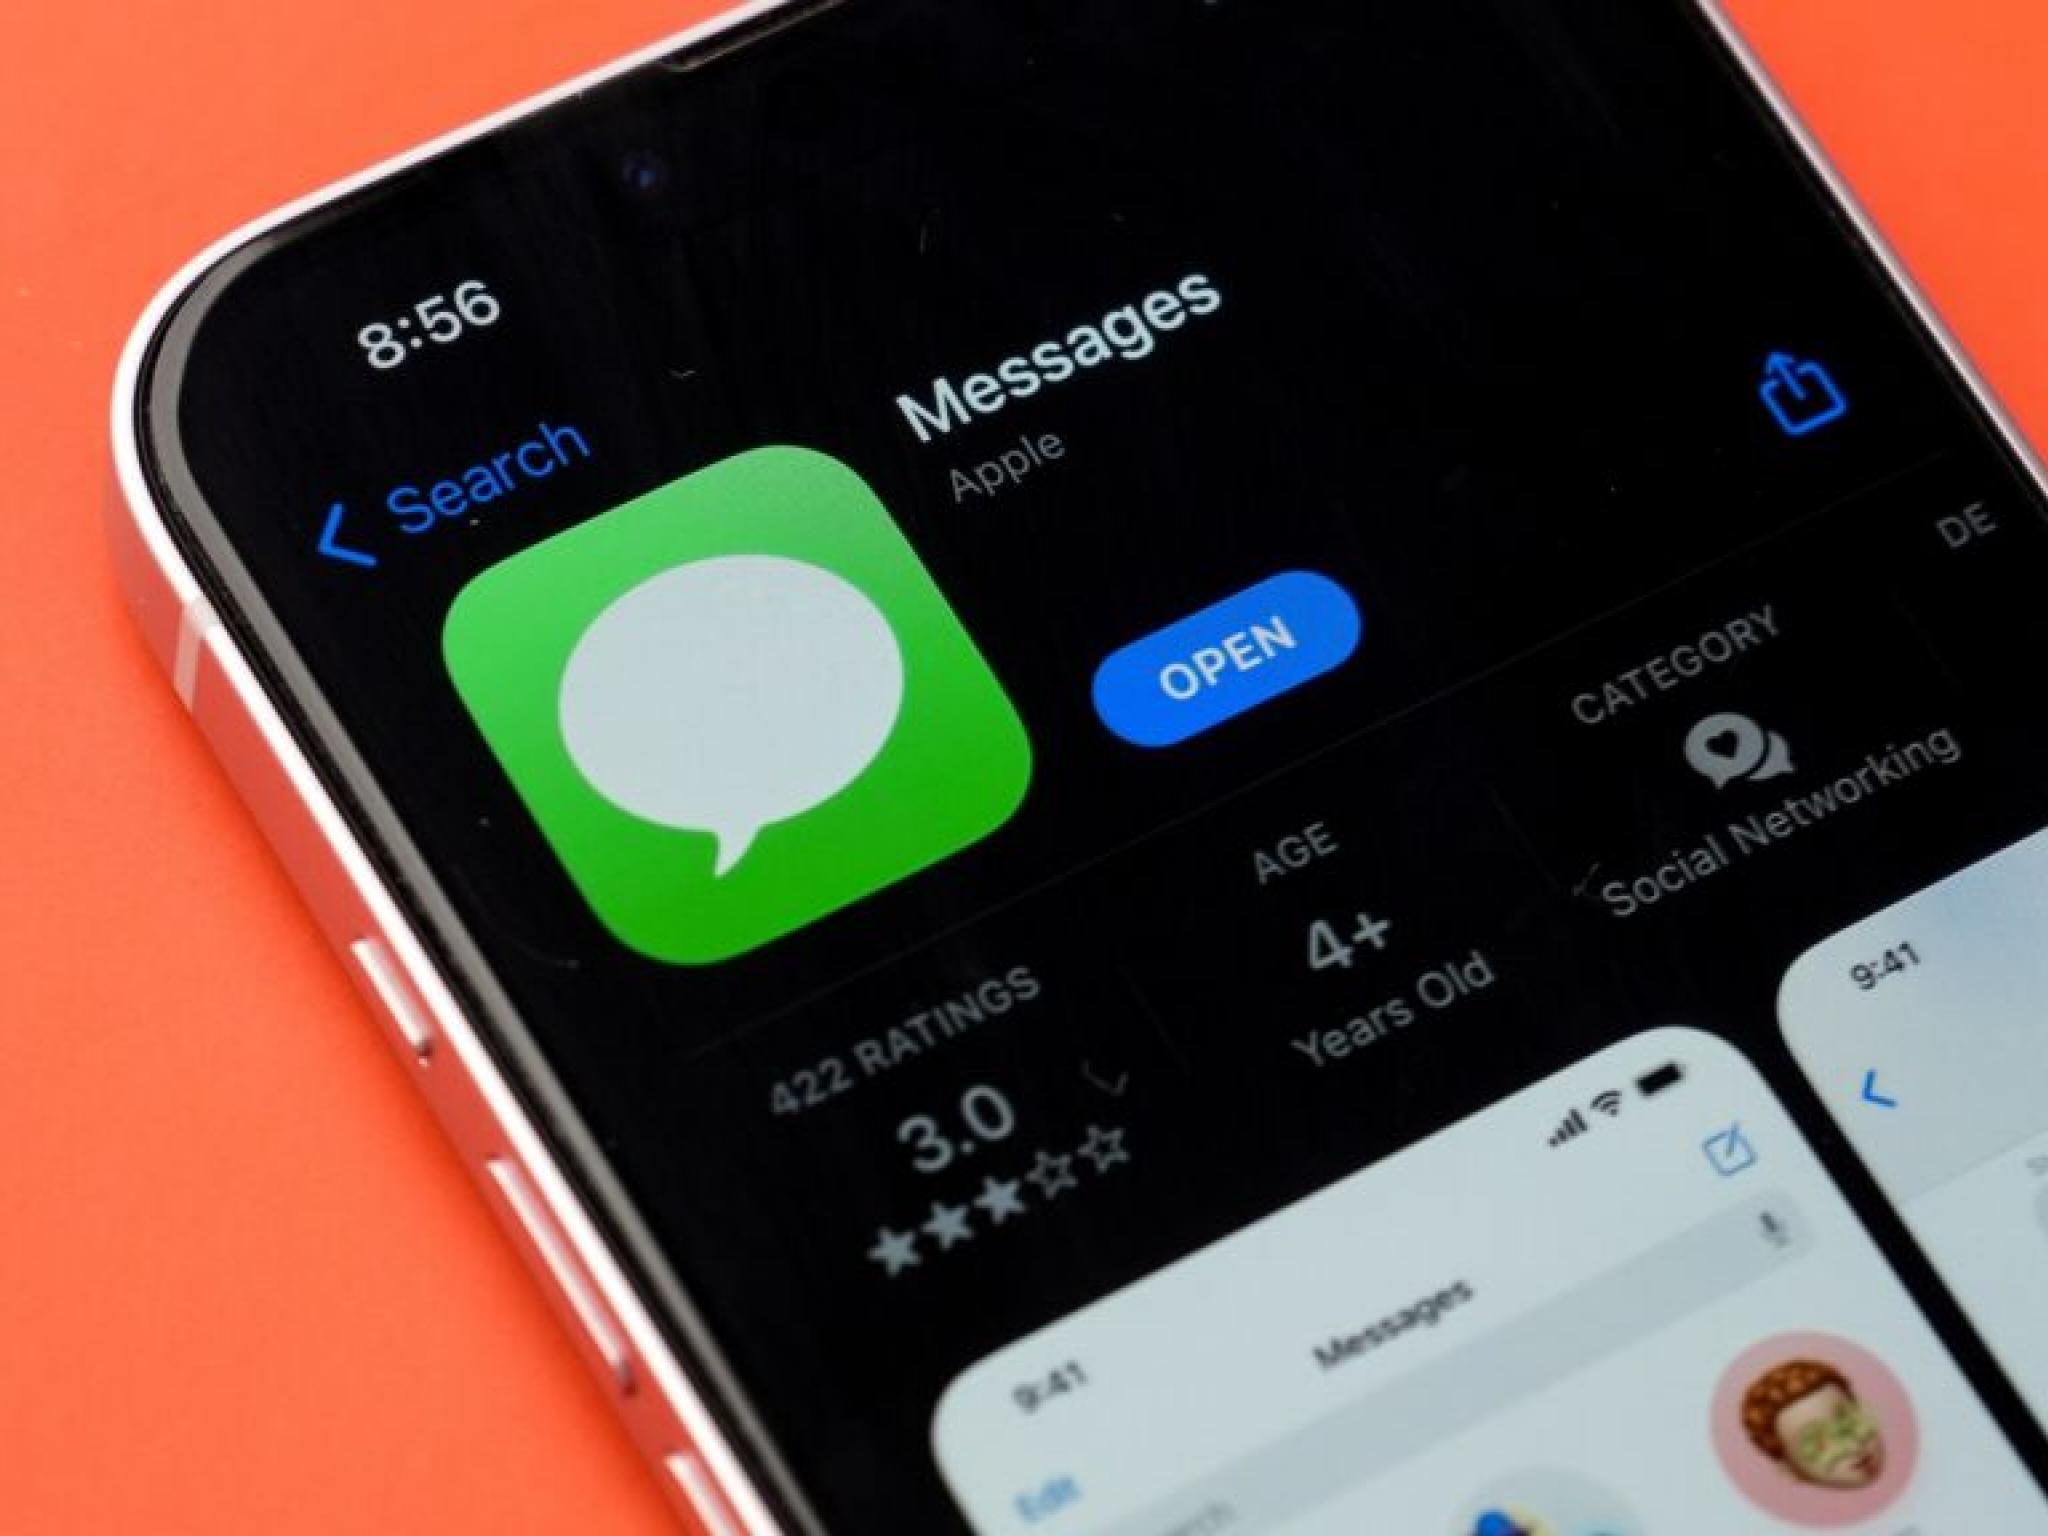  green-bubbles-with-read-receipts-apple-starts-enabling-rcs-on-latest-ios-18-beta-say-users 